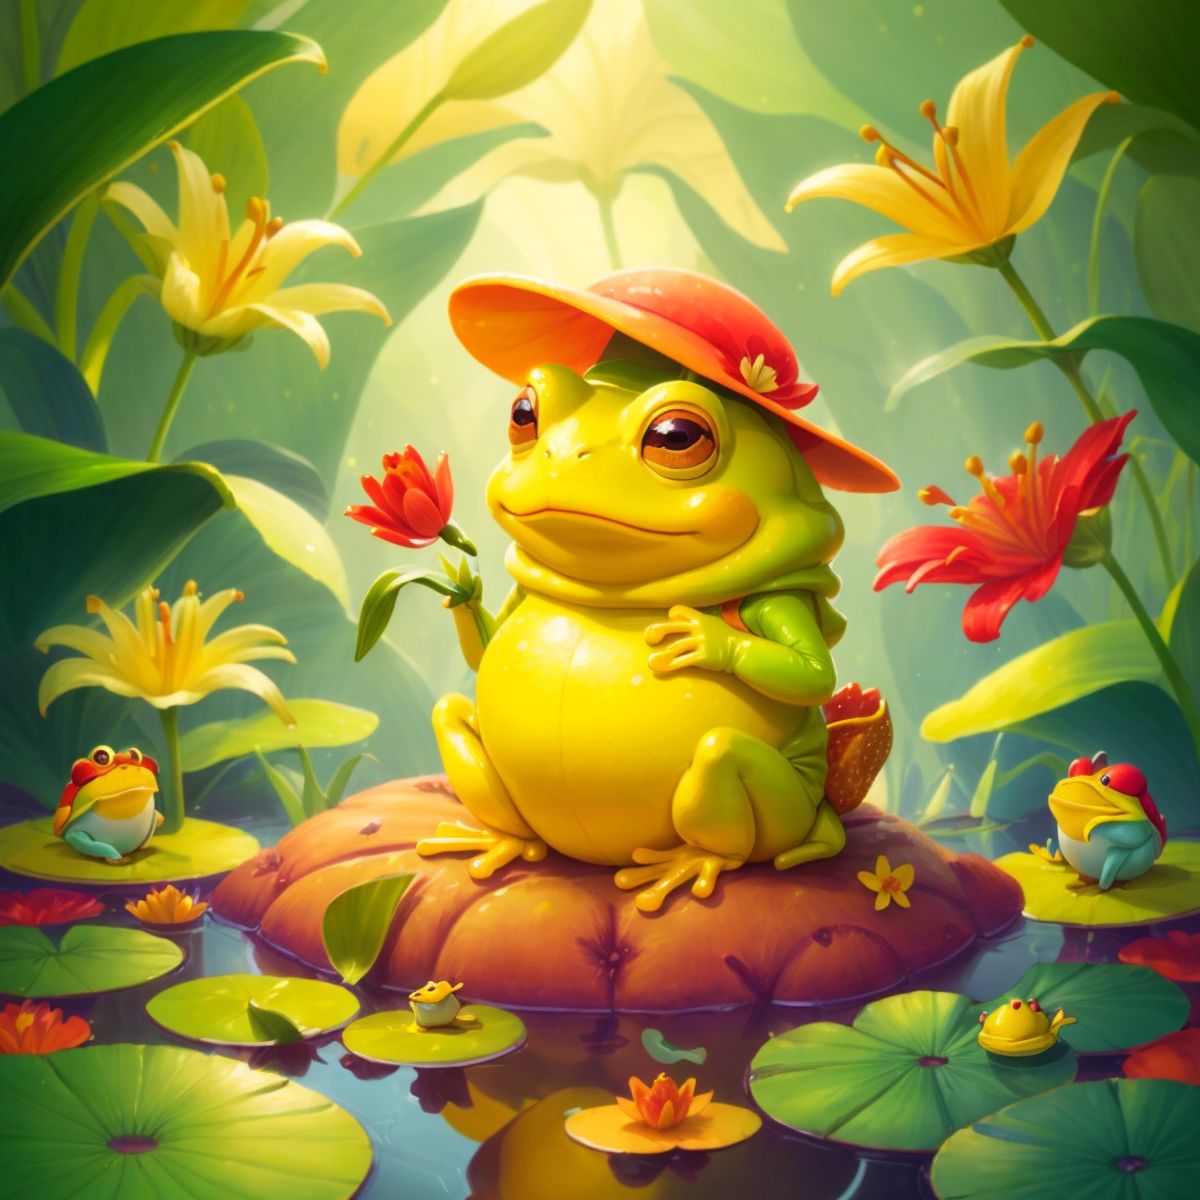 Ms. Yellow-Ole Frog sitting on a lily pad, sipping lemonade